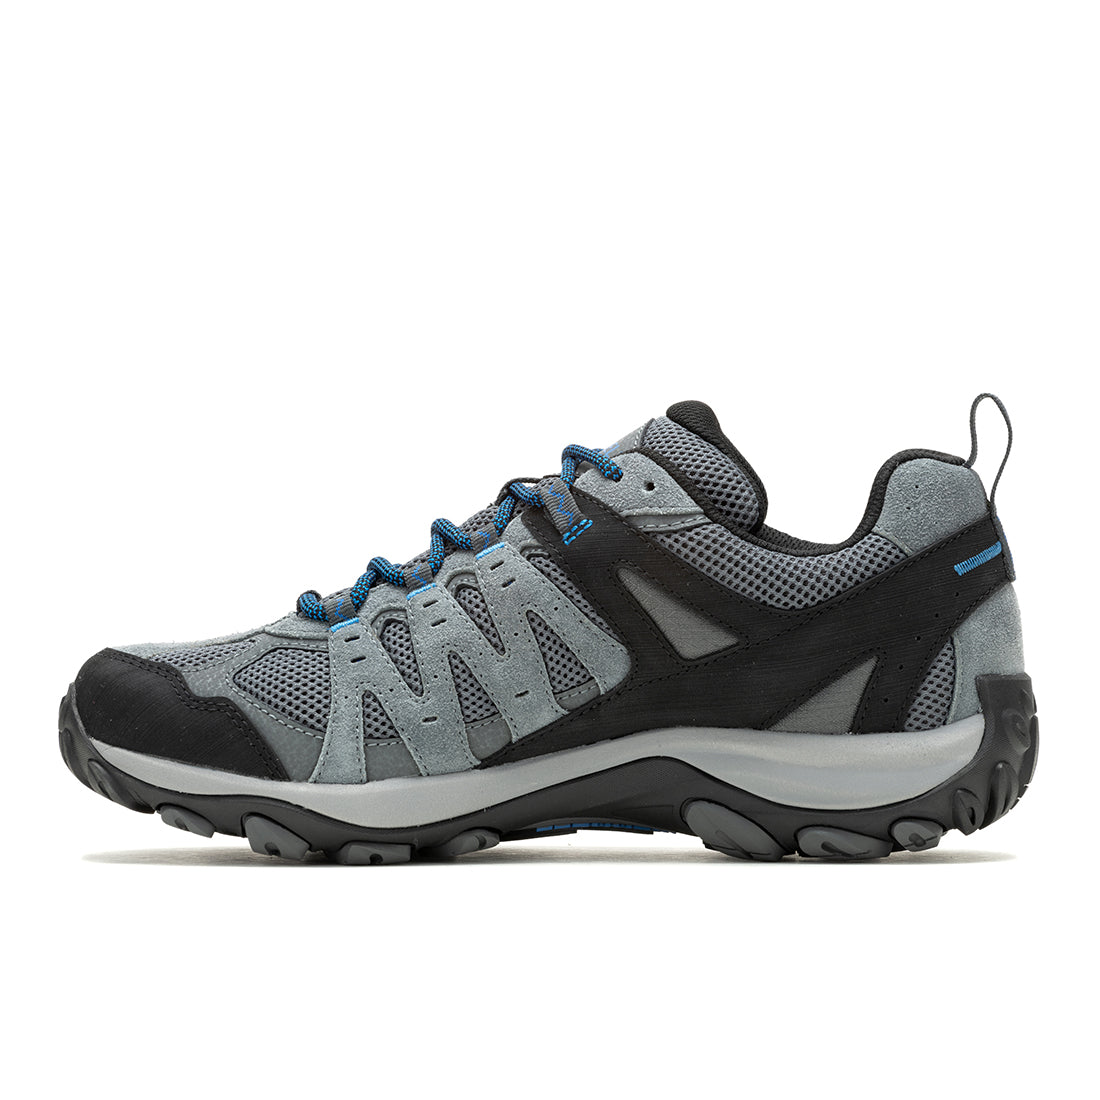 Accentor 3 Waterproof - Rock/Blue Mens Hiking Shoes